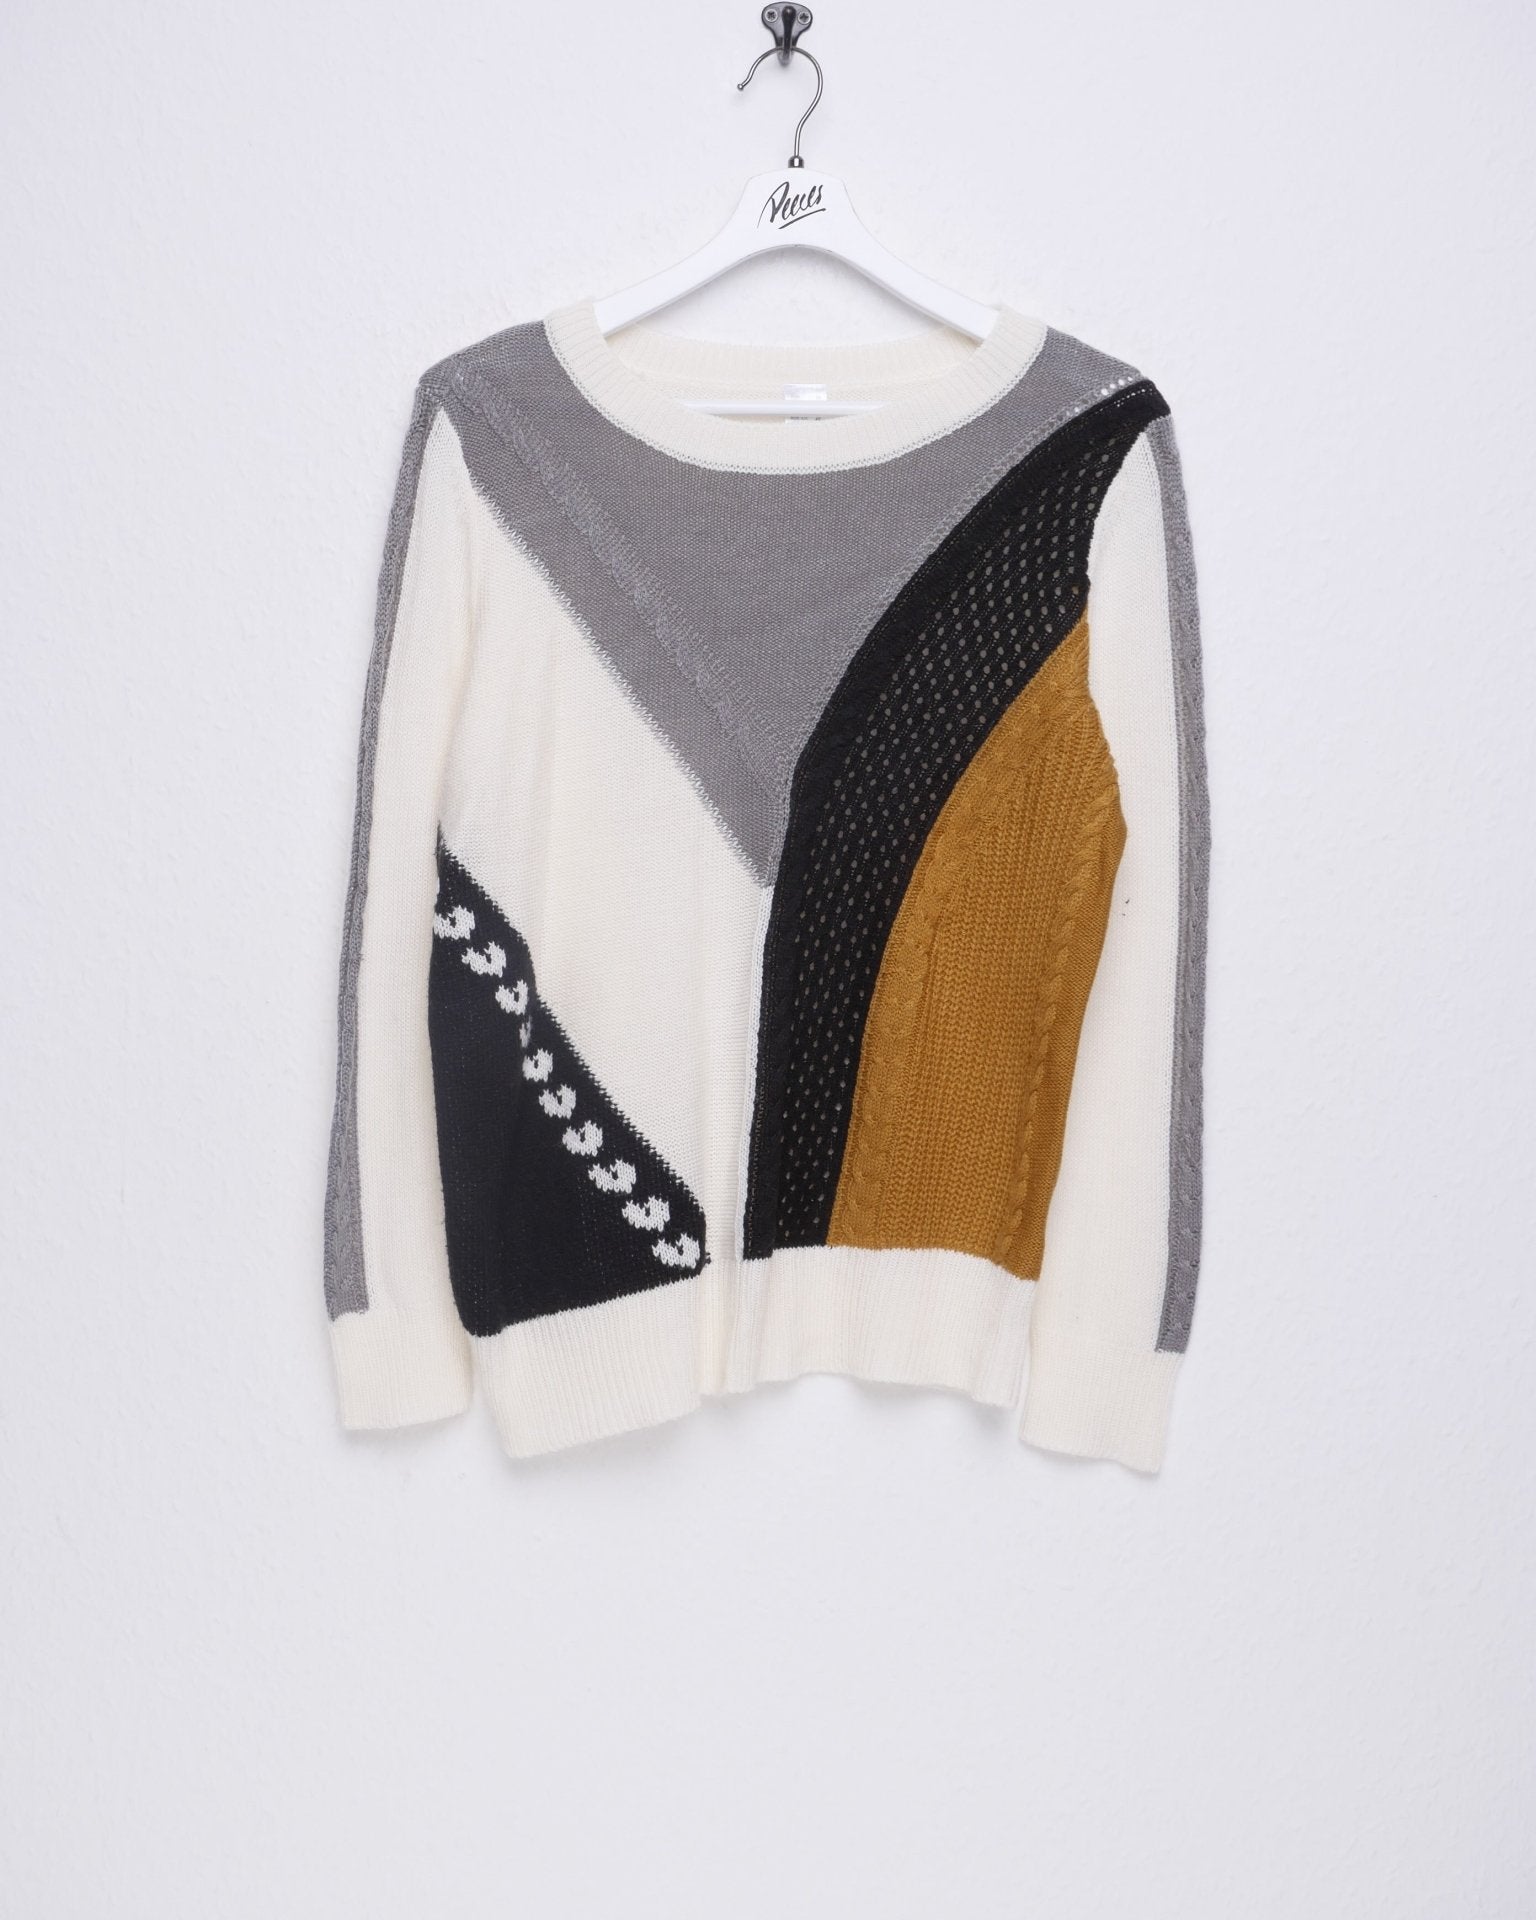 three toned patterned Knit Sweater - Peeces